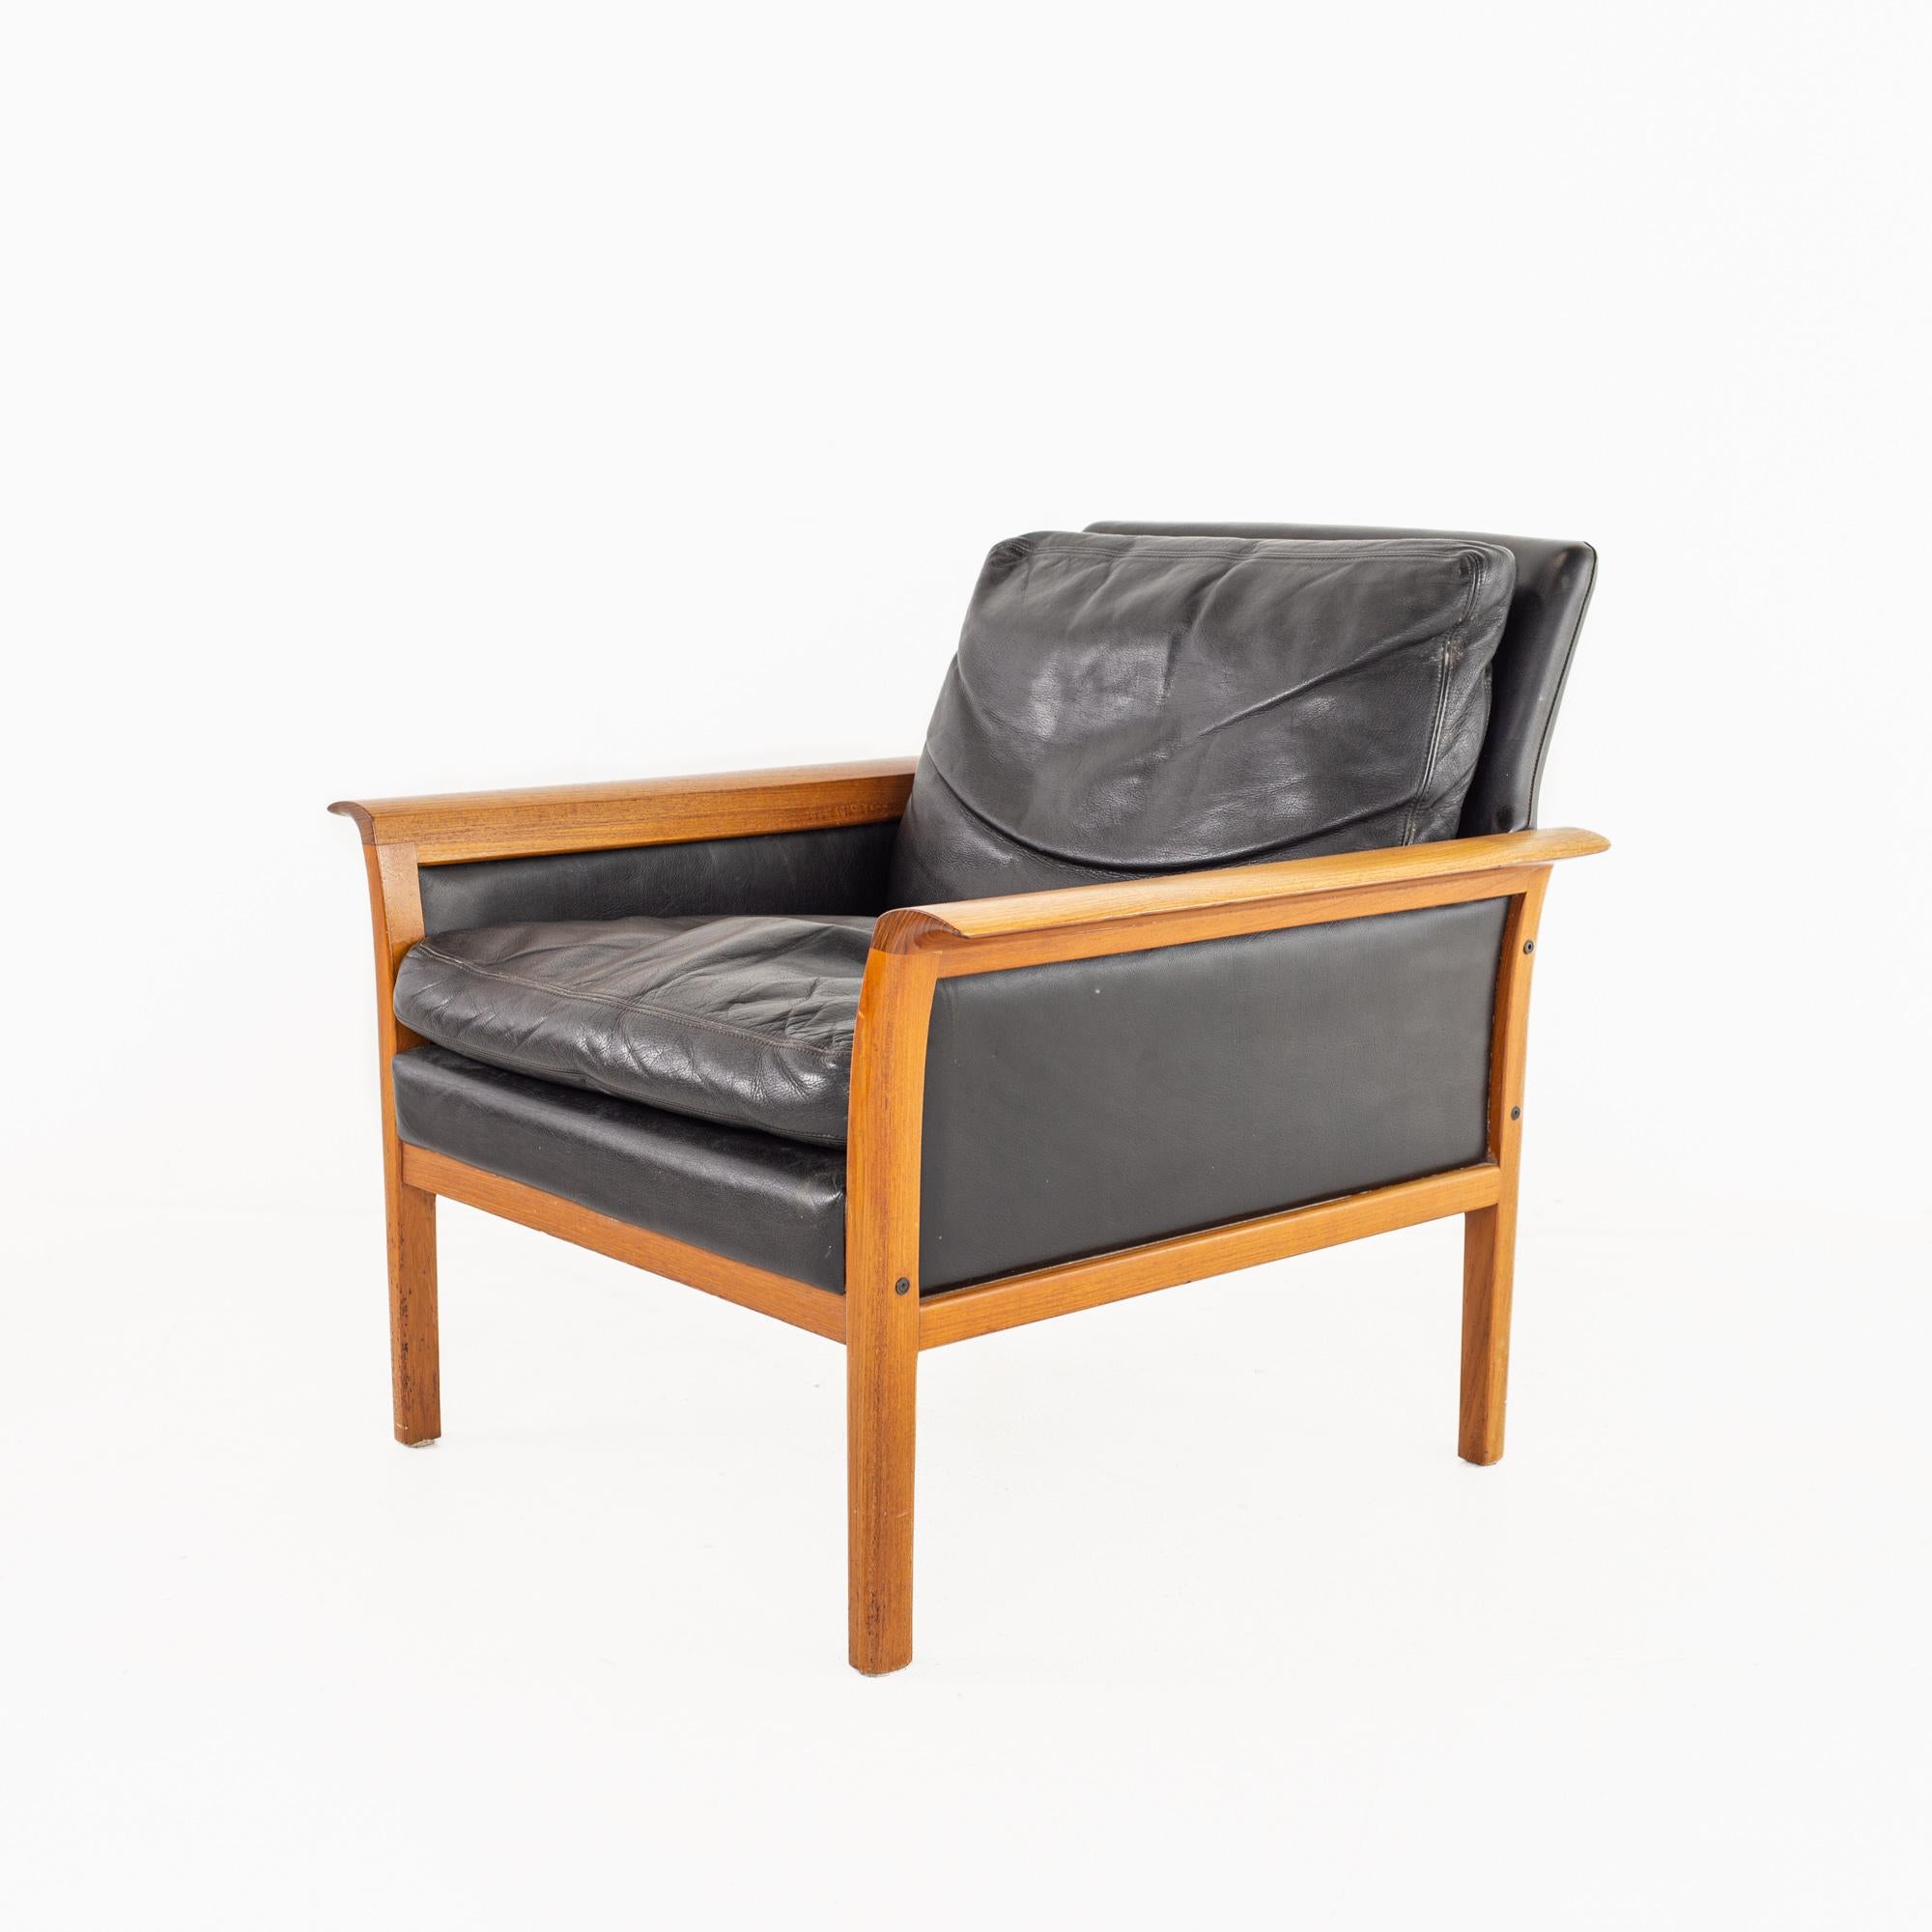 Late 20th Century Knut Sæter for Vatne Mobler MCM Teak and Black Leather Chair and Ottoman Set